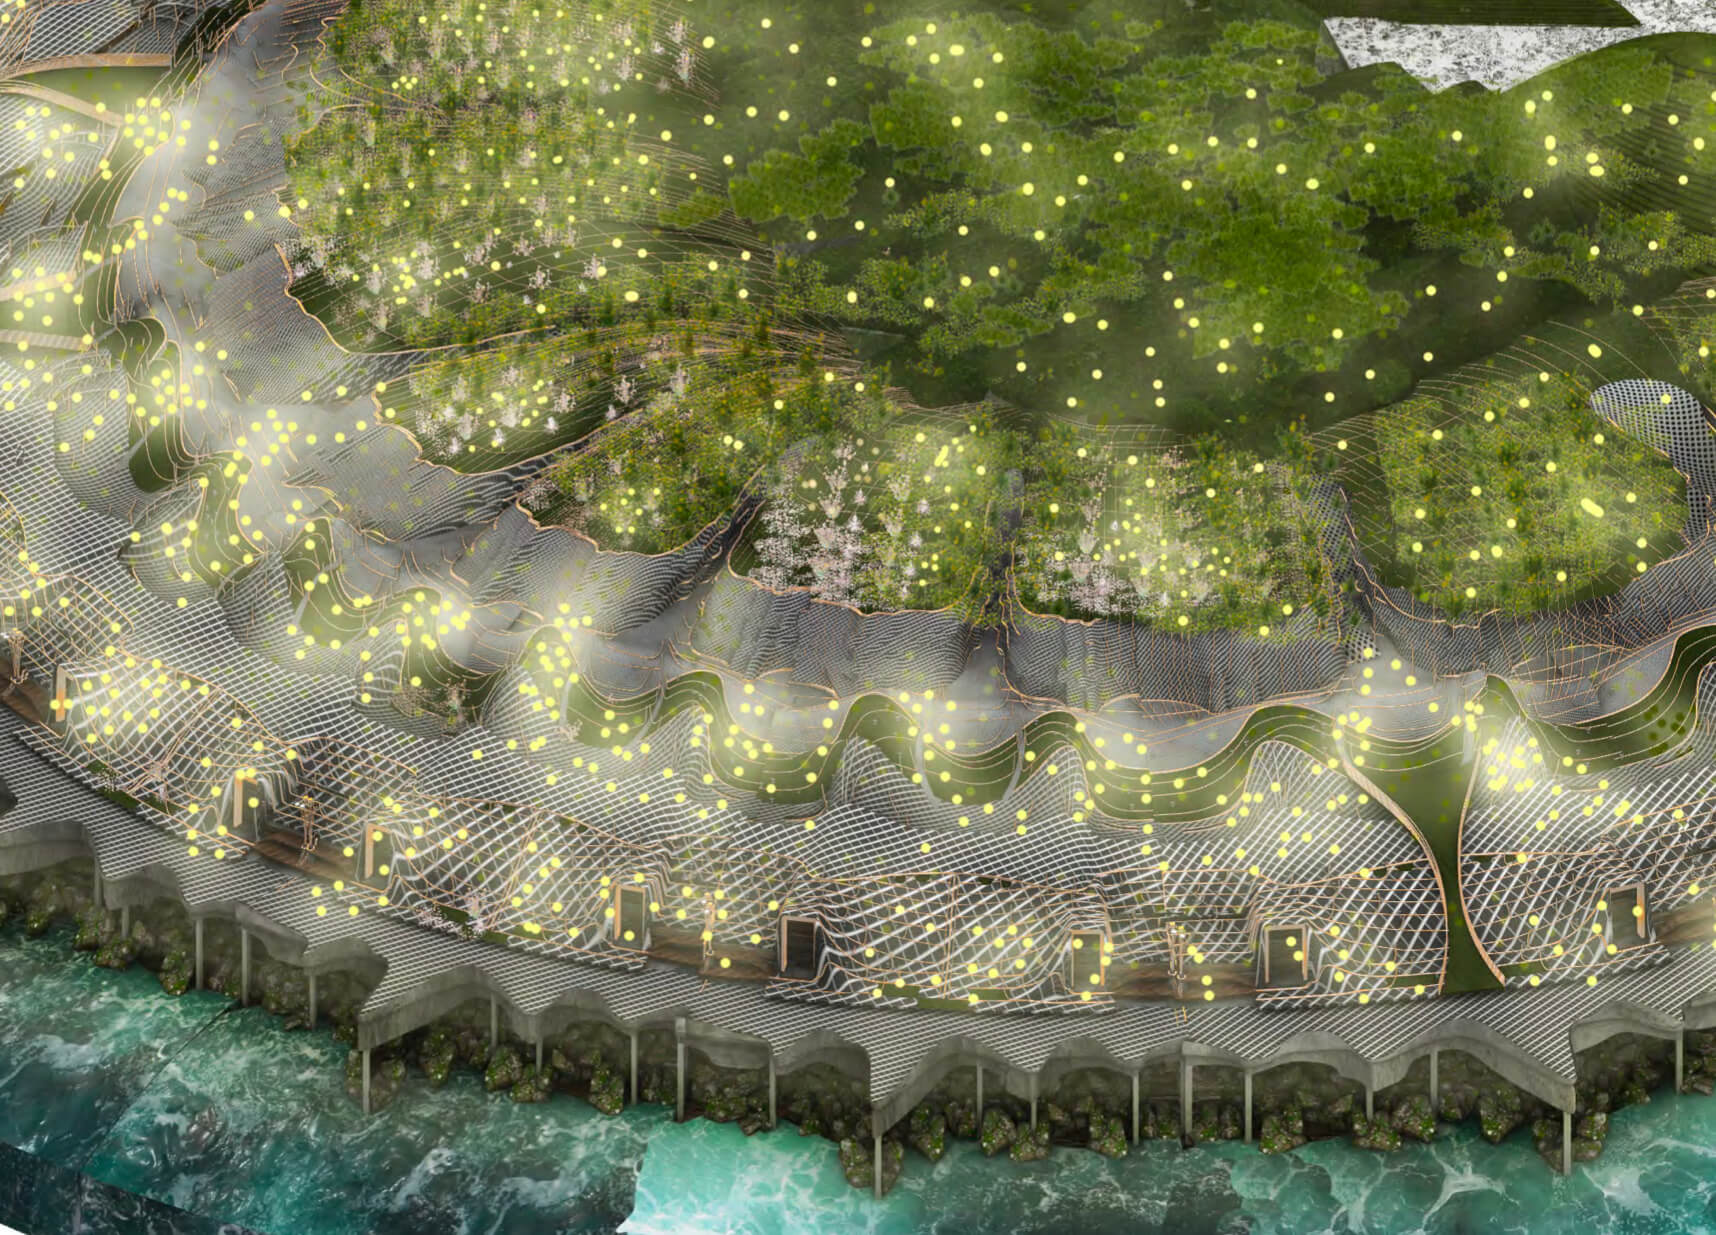 A render of waterfront protection effort using green wetlands and concreted structures.